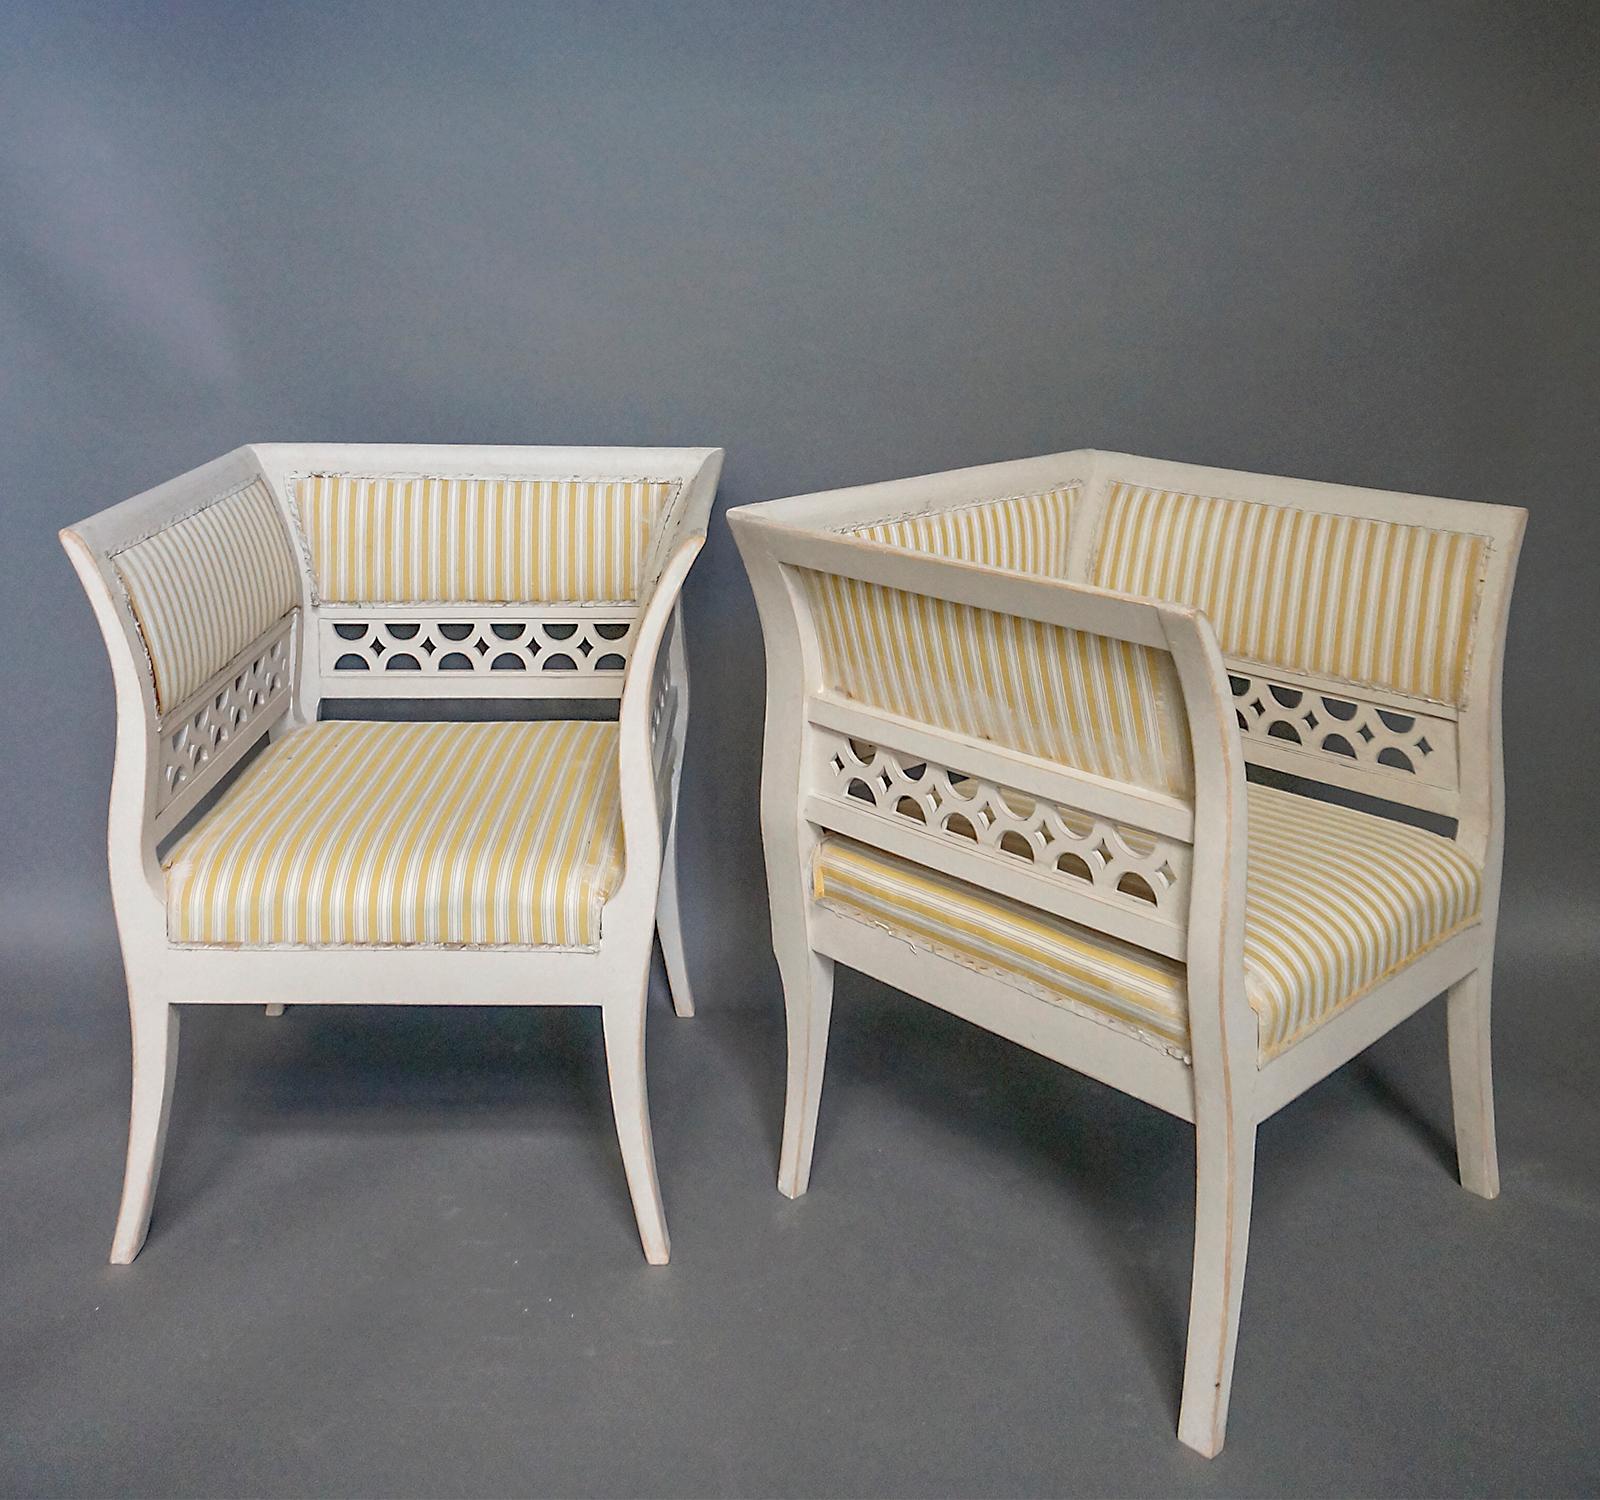 Pair of large armchairs in the Gustavian style, Sweden circa 1910. The high arms and backs are upholstered above pierced panels, and the flaring arms continue into saber legs in an elegant curve. The deep upholstered seats provide a comfortable nook